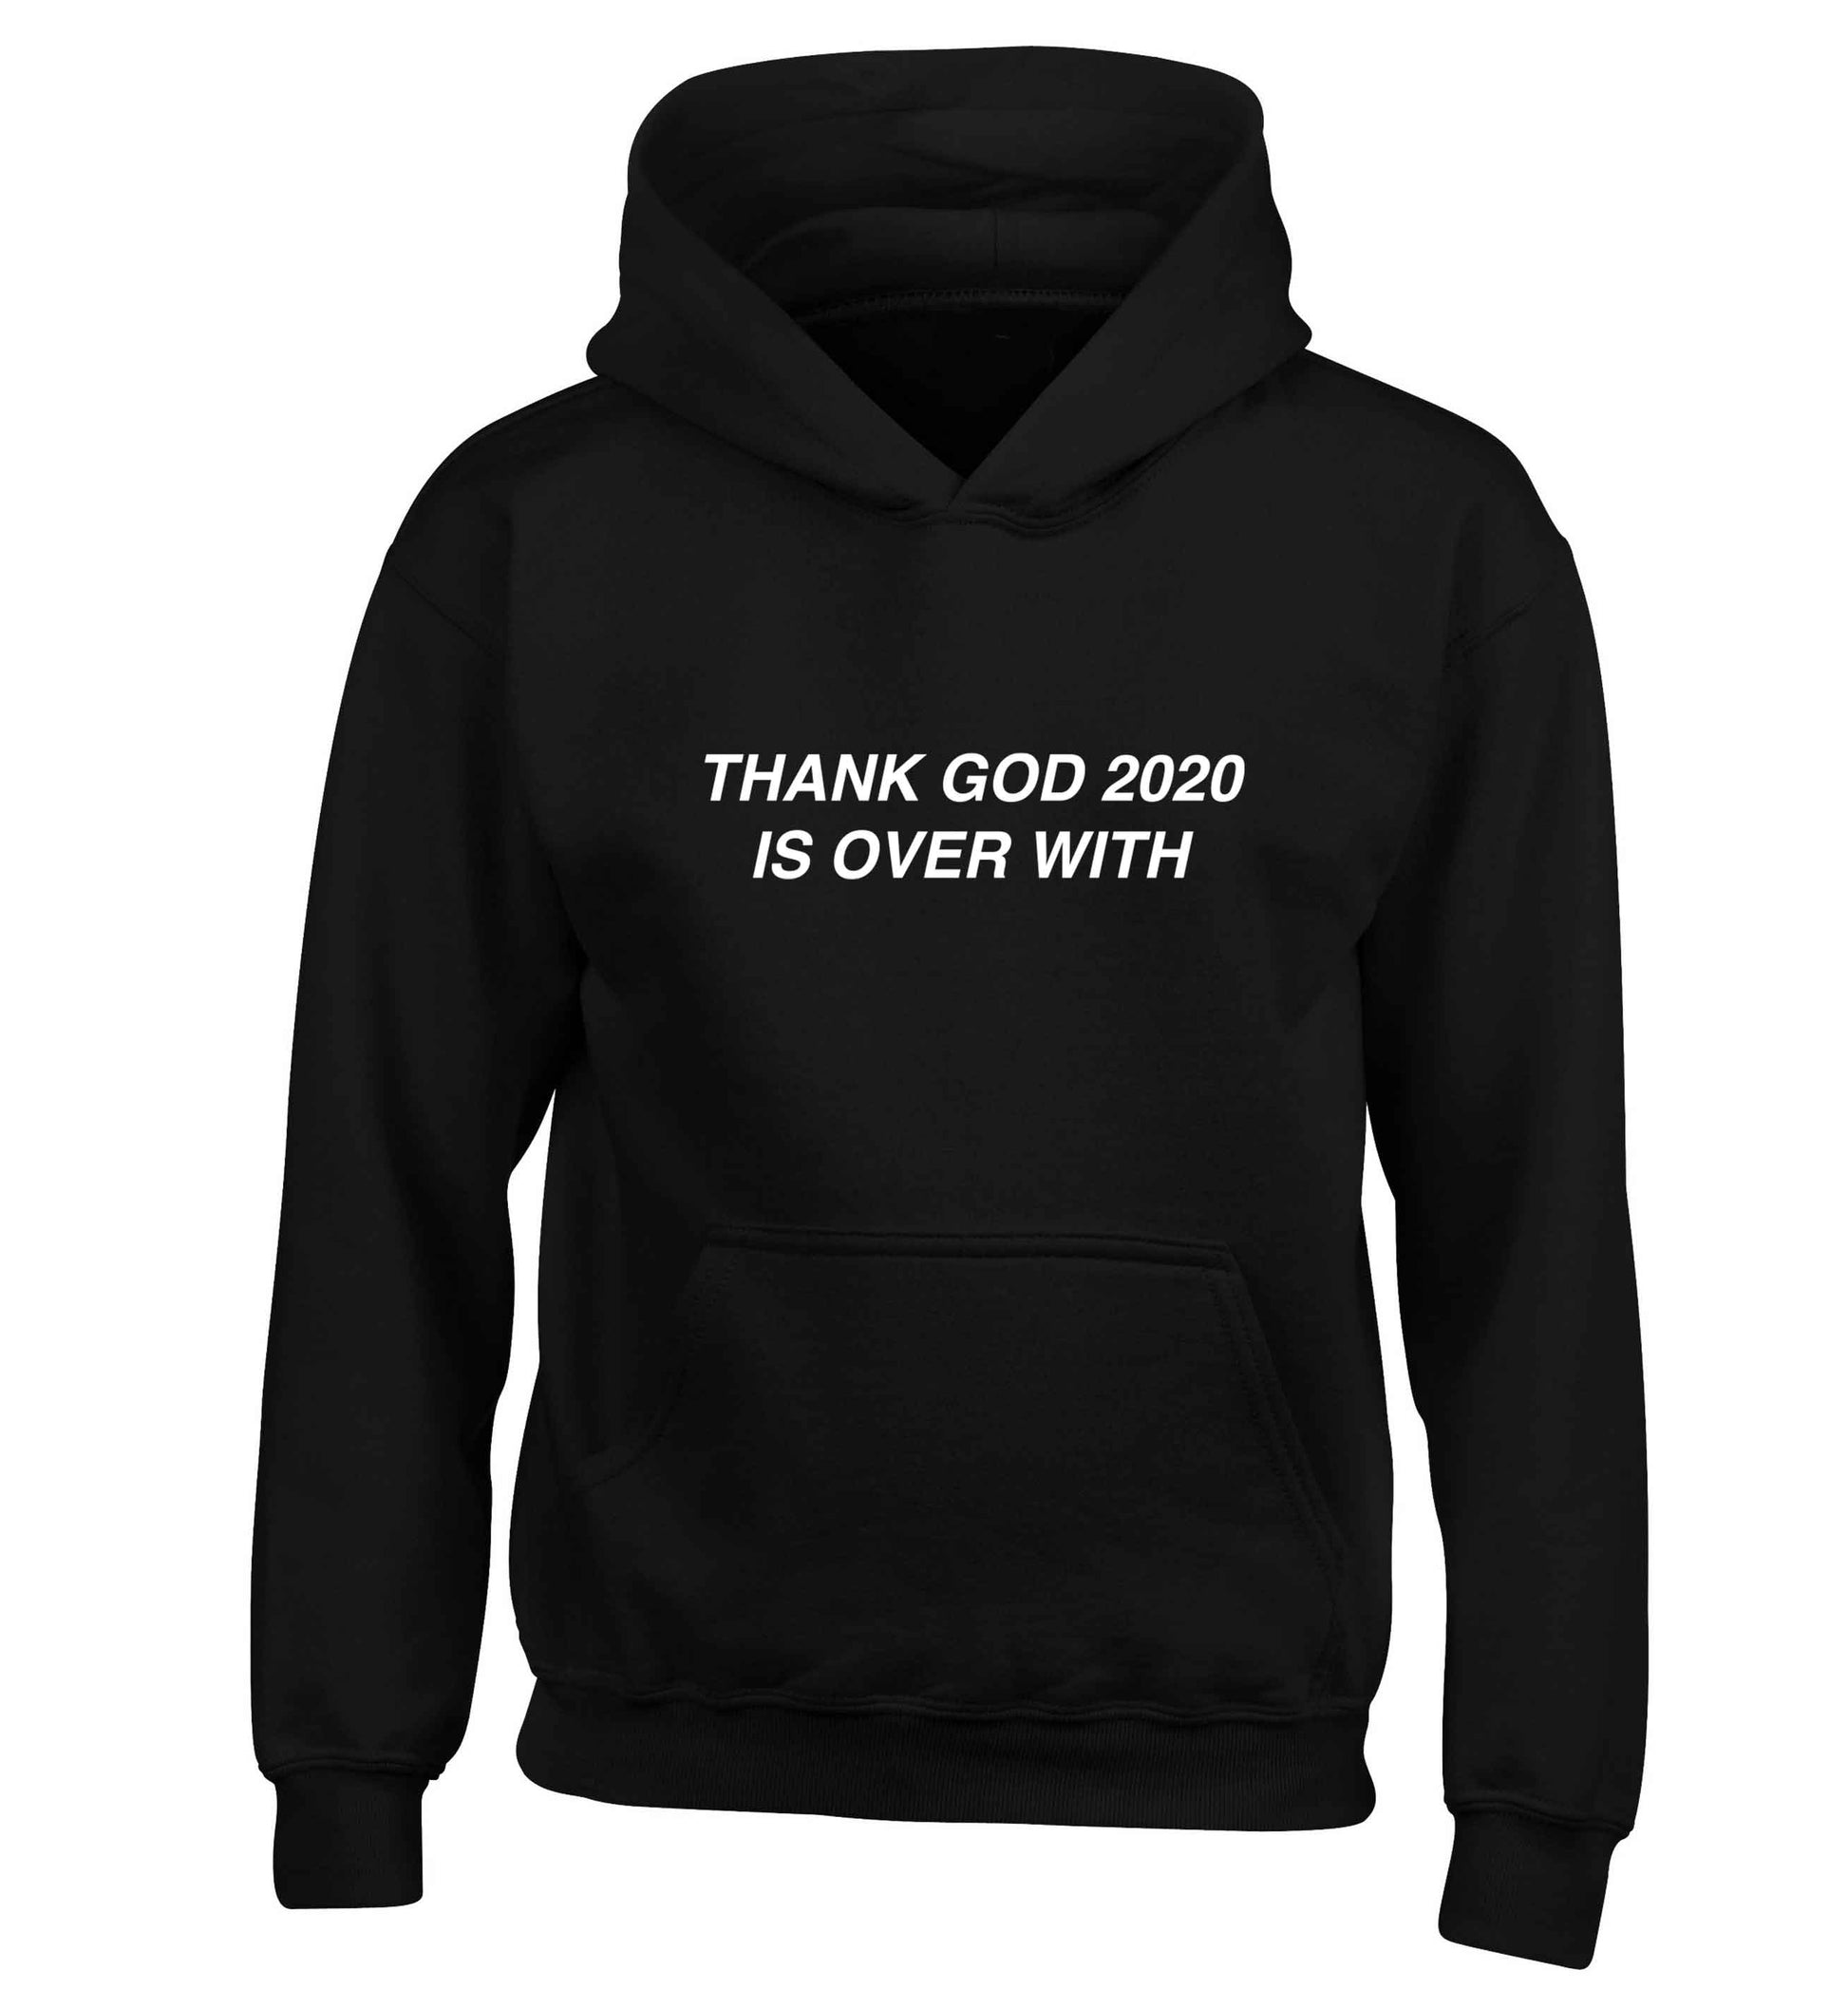 Thank god 2020 is over with children's black hoodie 12-13 Years